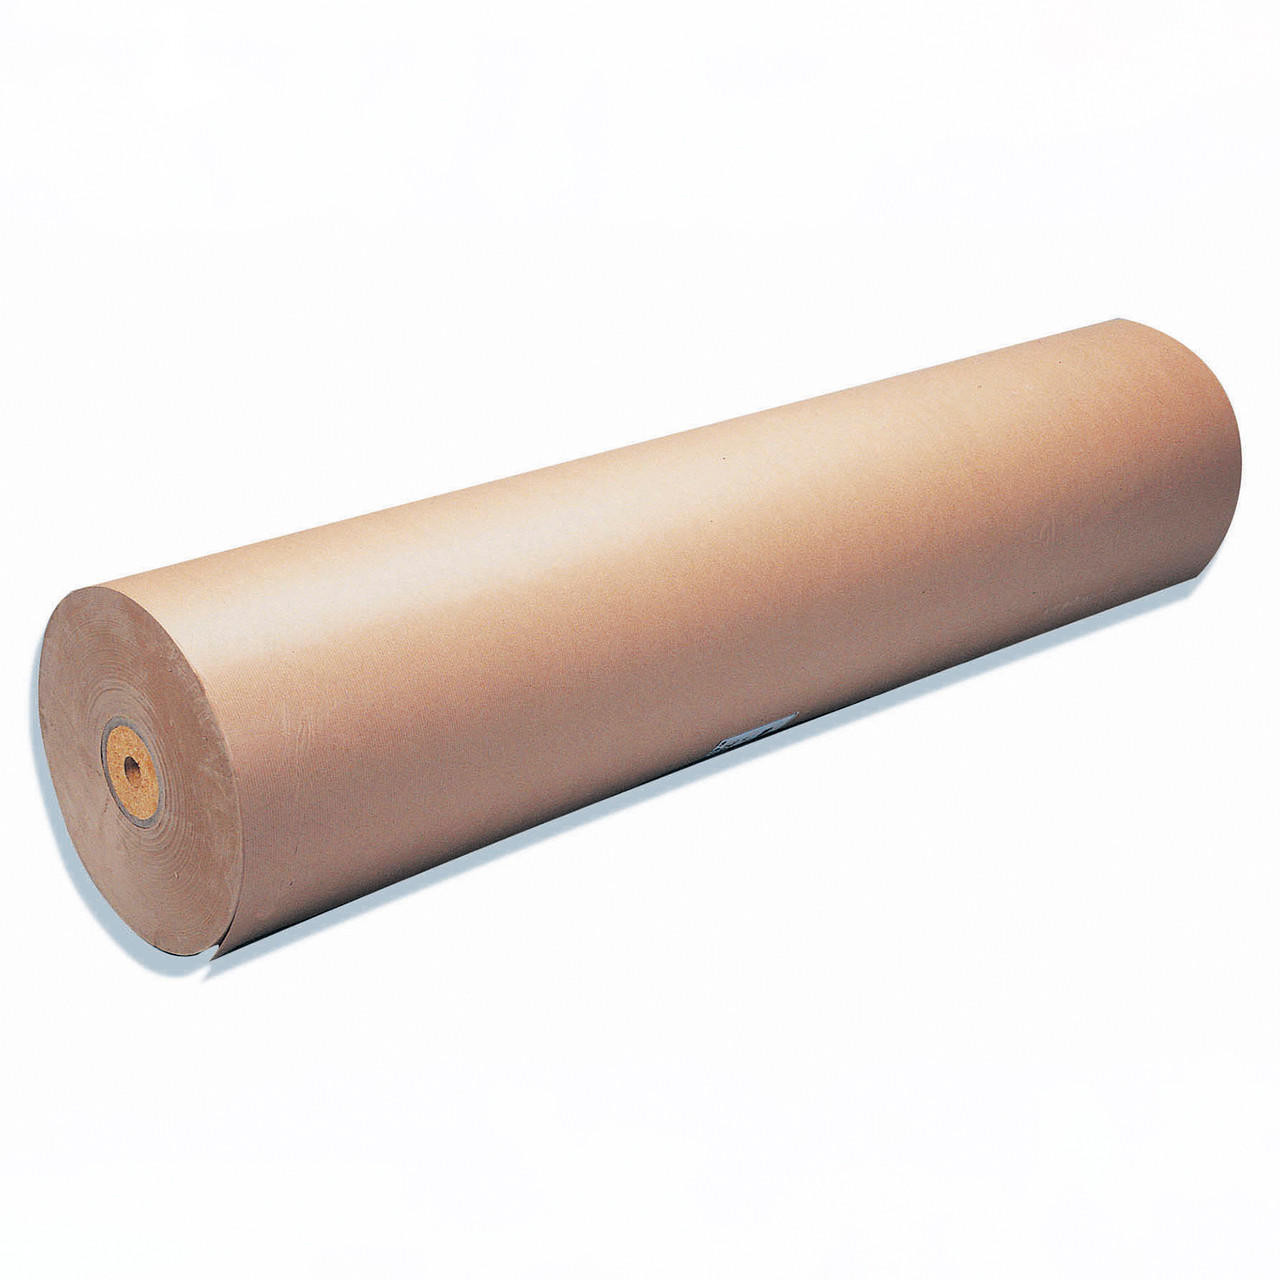 Clairefontaine Kraft Paper Roll 1 x 10m Brown